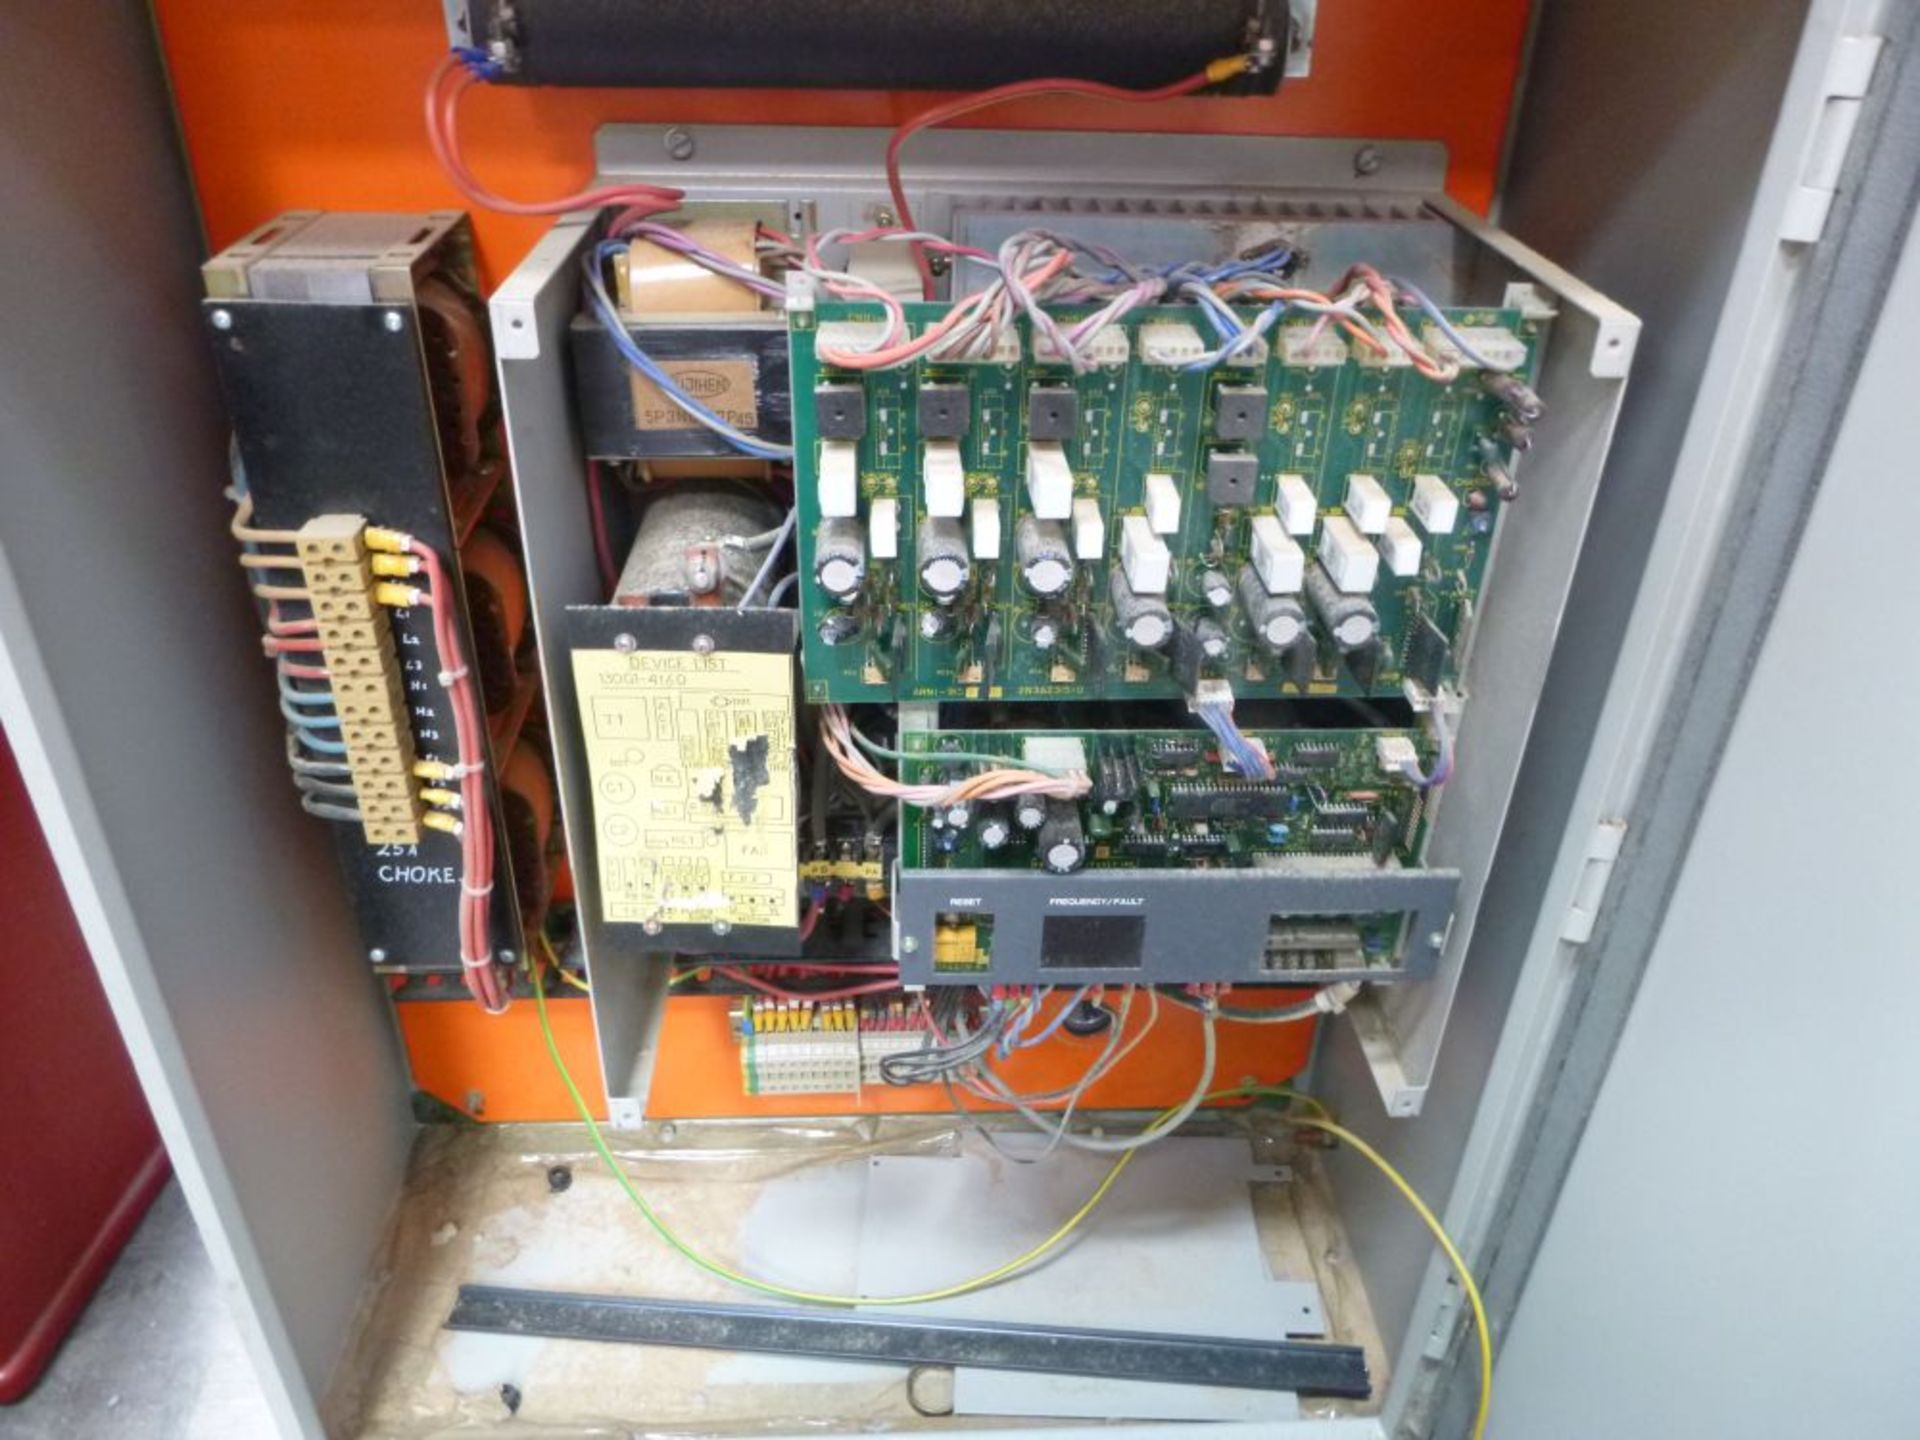 * 4 Head Rye MG 8x4 CNC Router AC Drives, spares/repair & Wadkin Inverter for CNC in enclosure. - Image 6 of 6